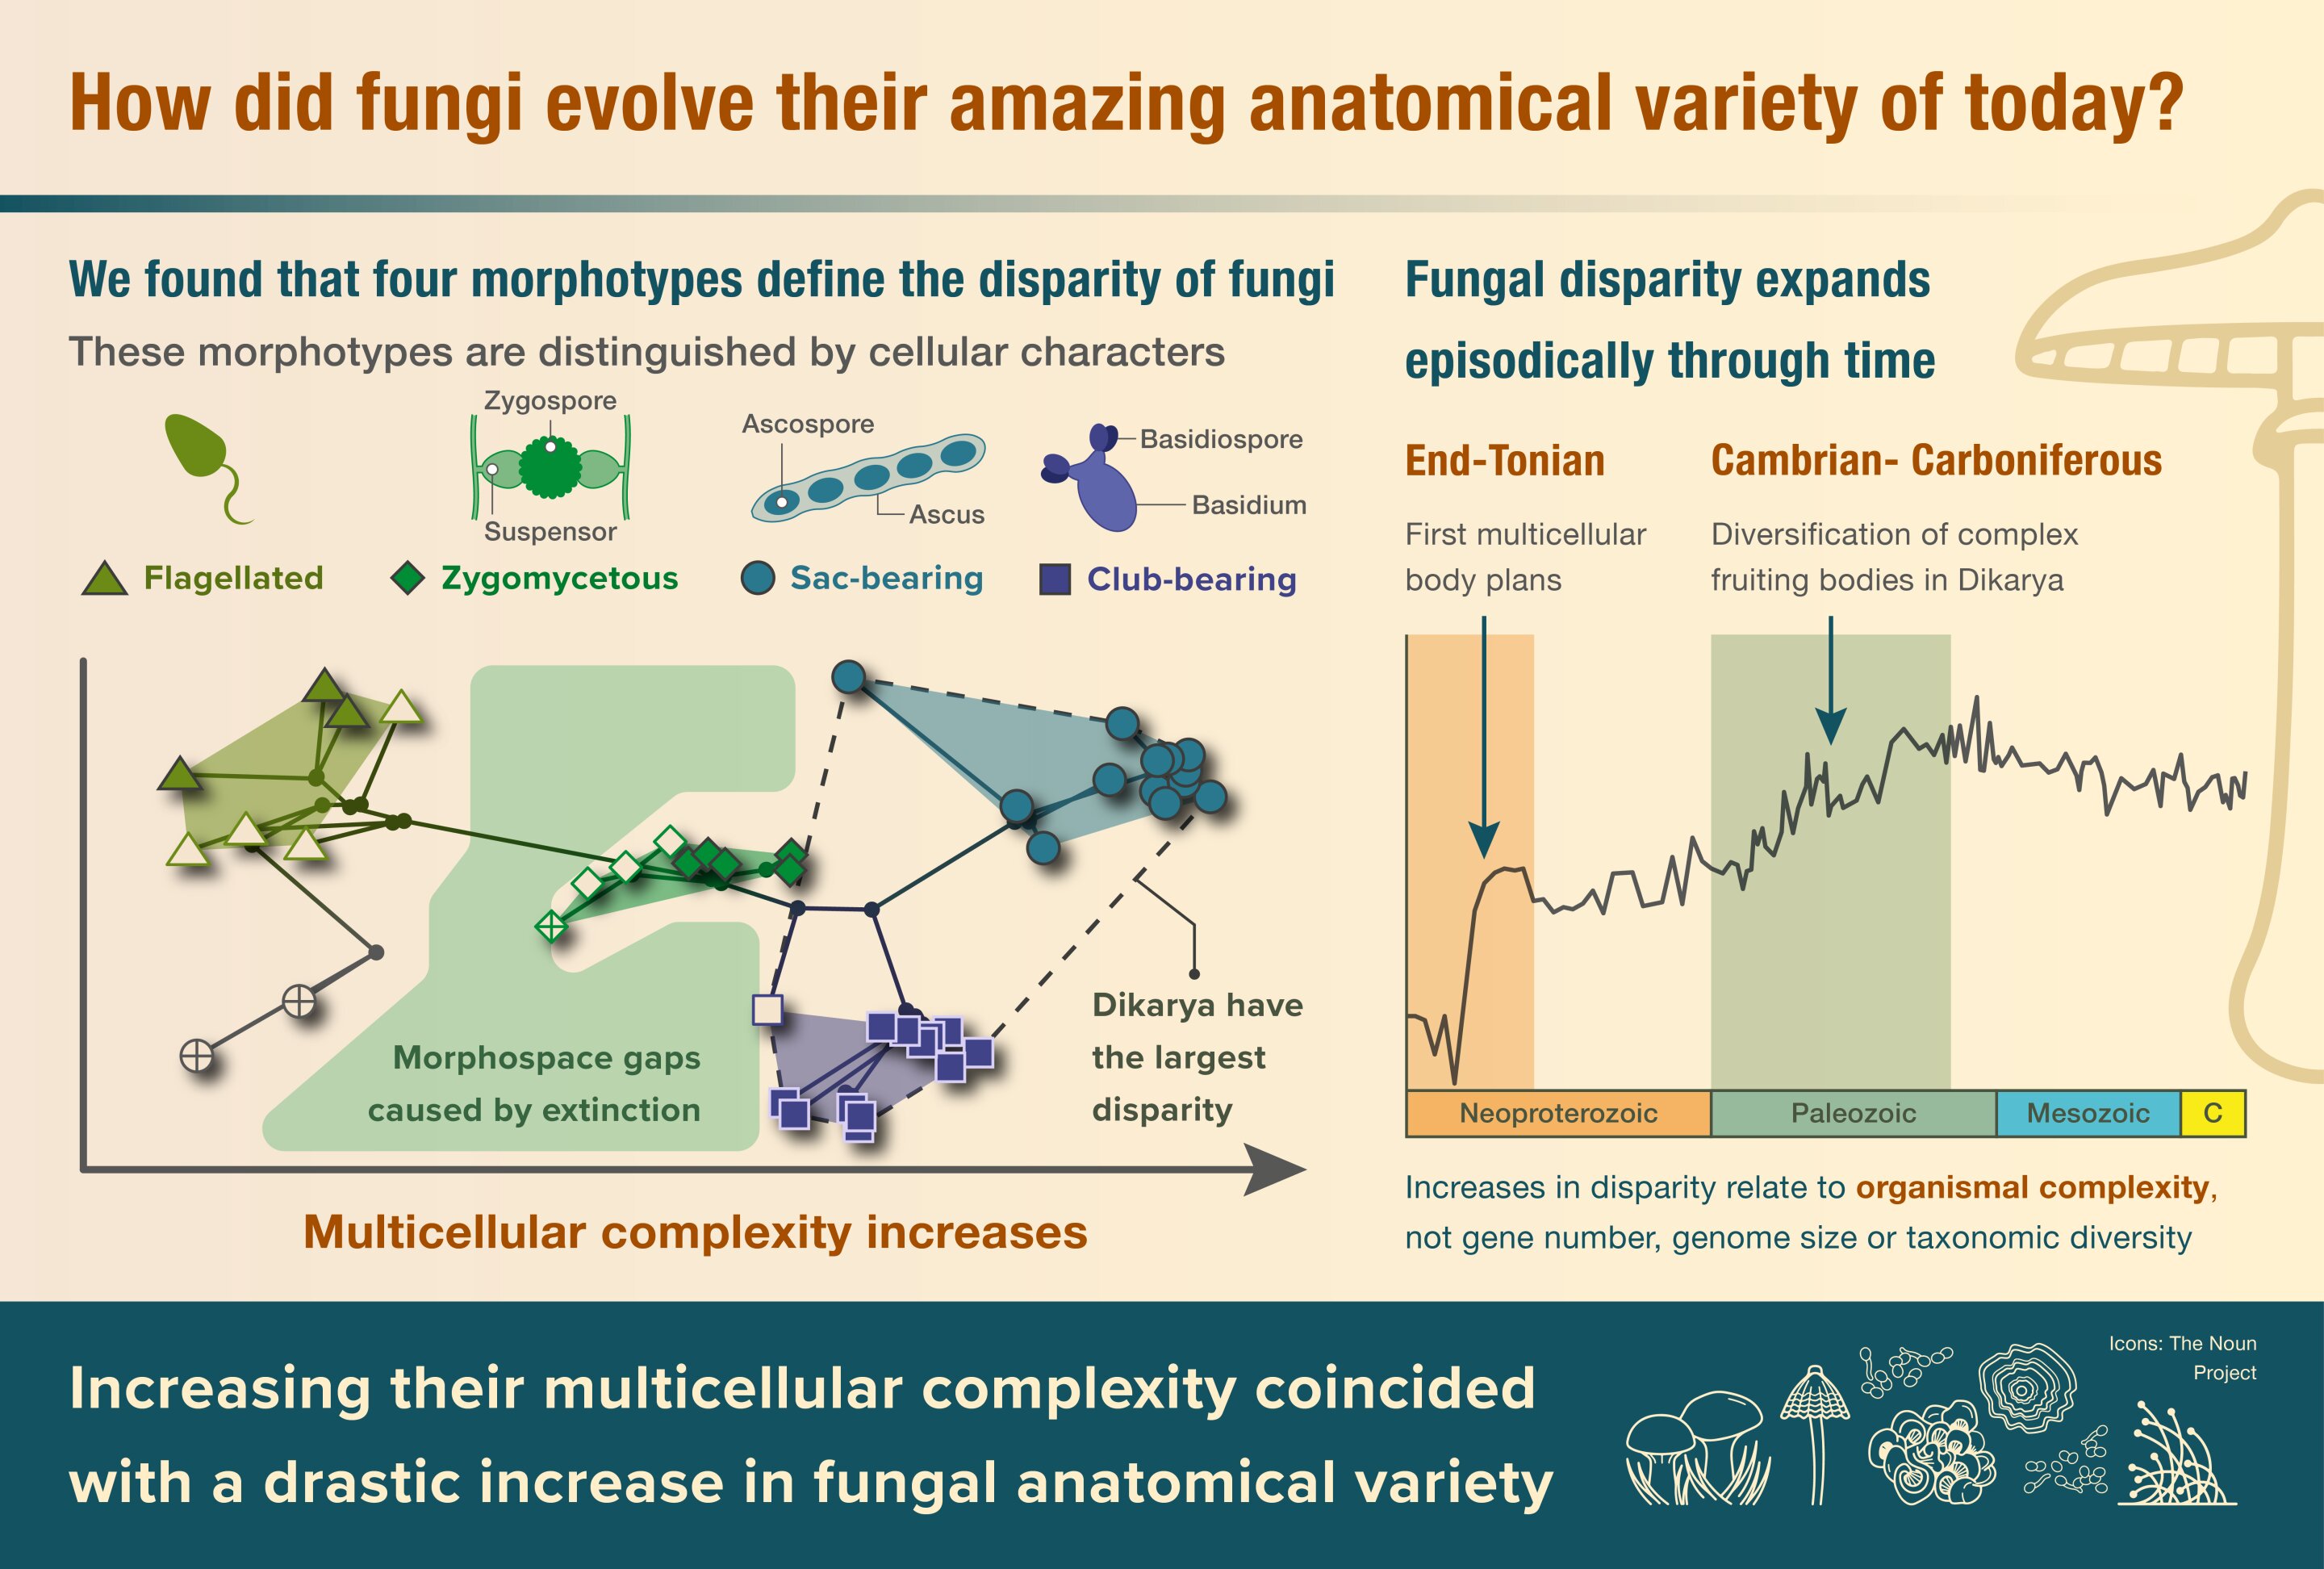 Weird and wonderful world of fungi shaped by evolutionary bursts, study finds